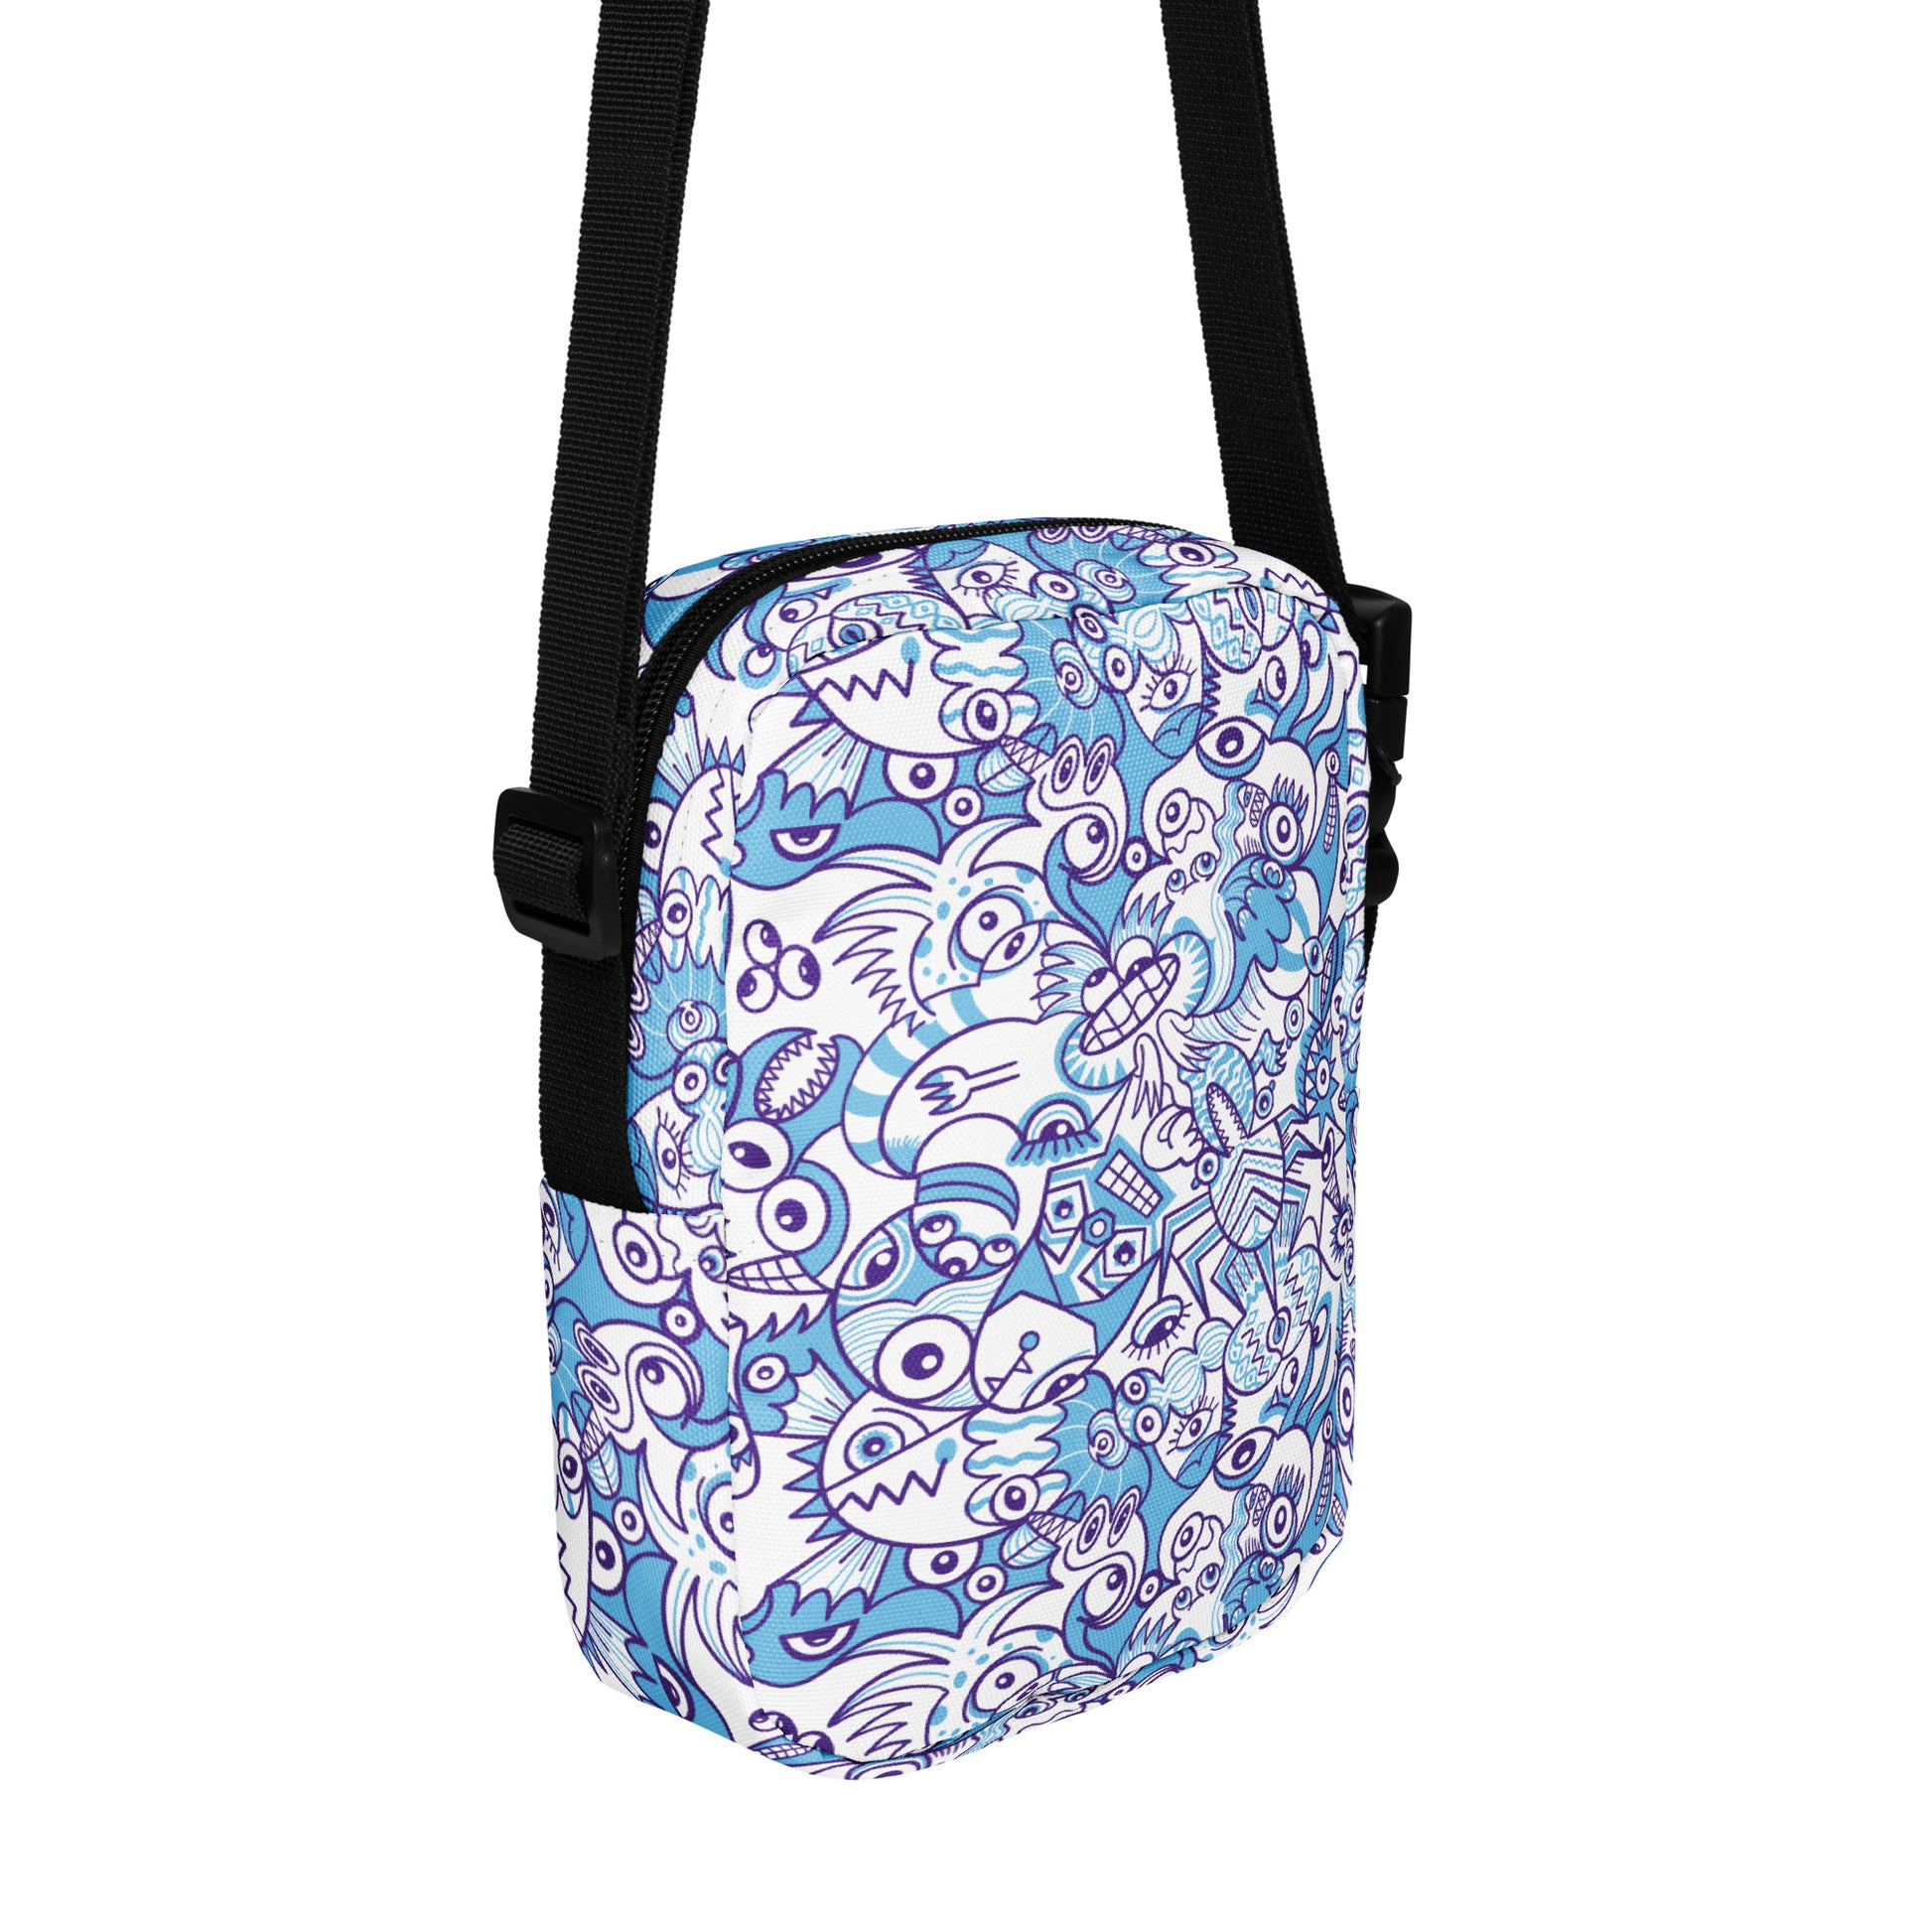 Whimsical Blue Doodle Critterscape pattern design - Utility crossbody bag. Back view